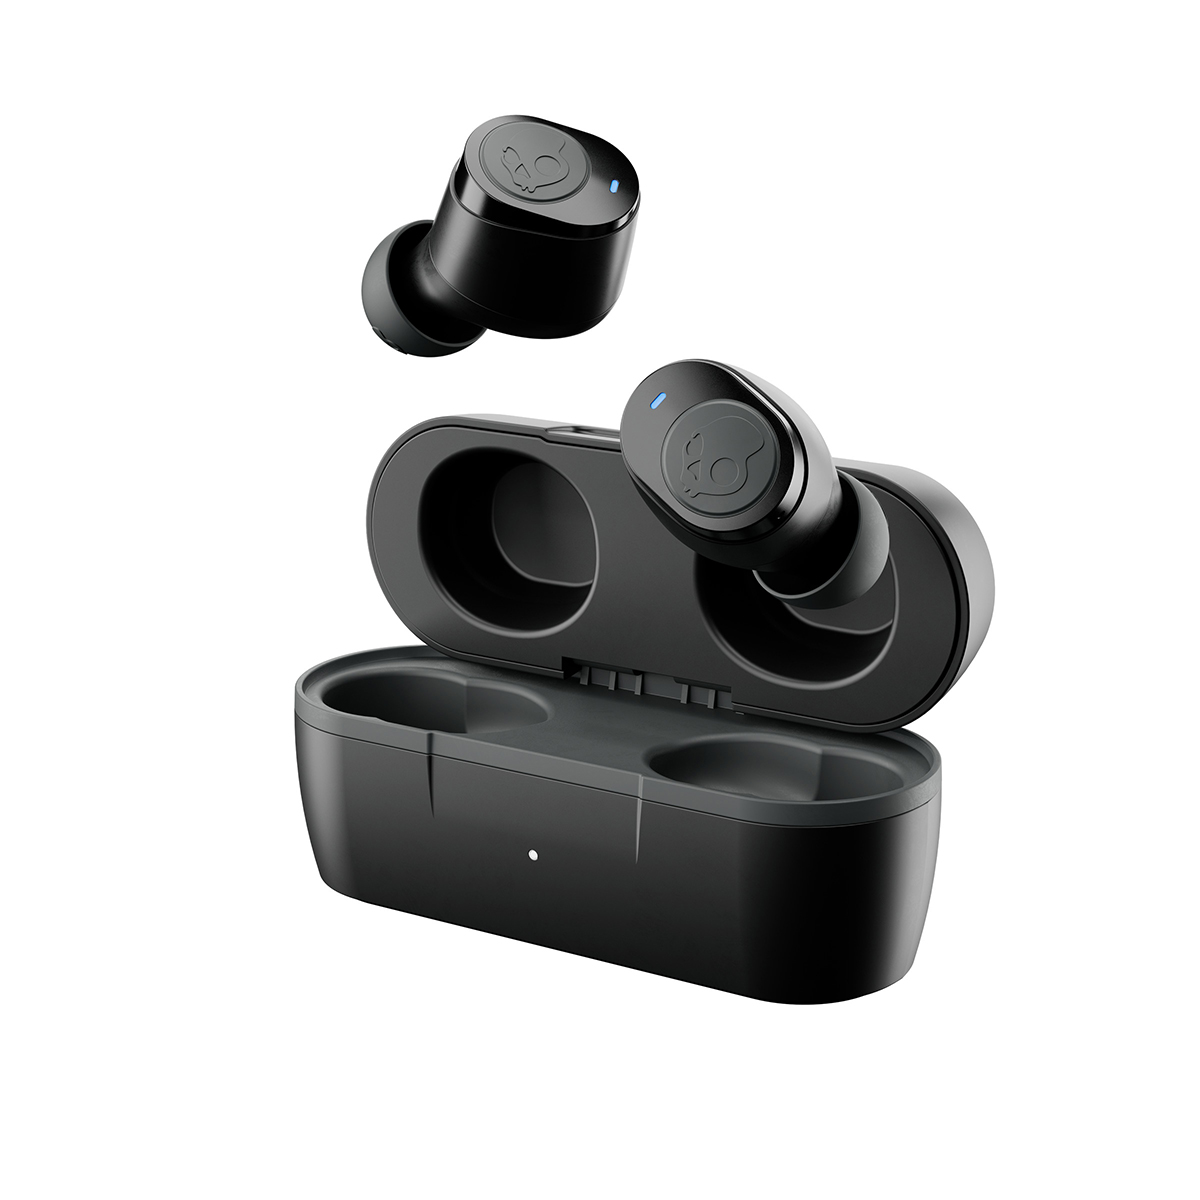 Skullcandy Jib True 2 Wireless Earbuds with Charging Case Tile-Finding Technology Water-Resistant Buds Black S1JTWP740